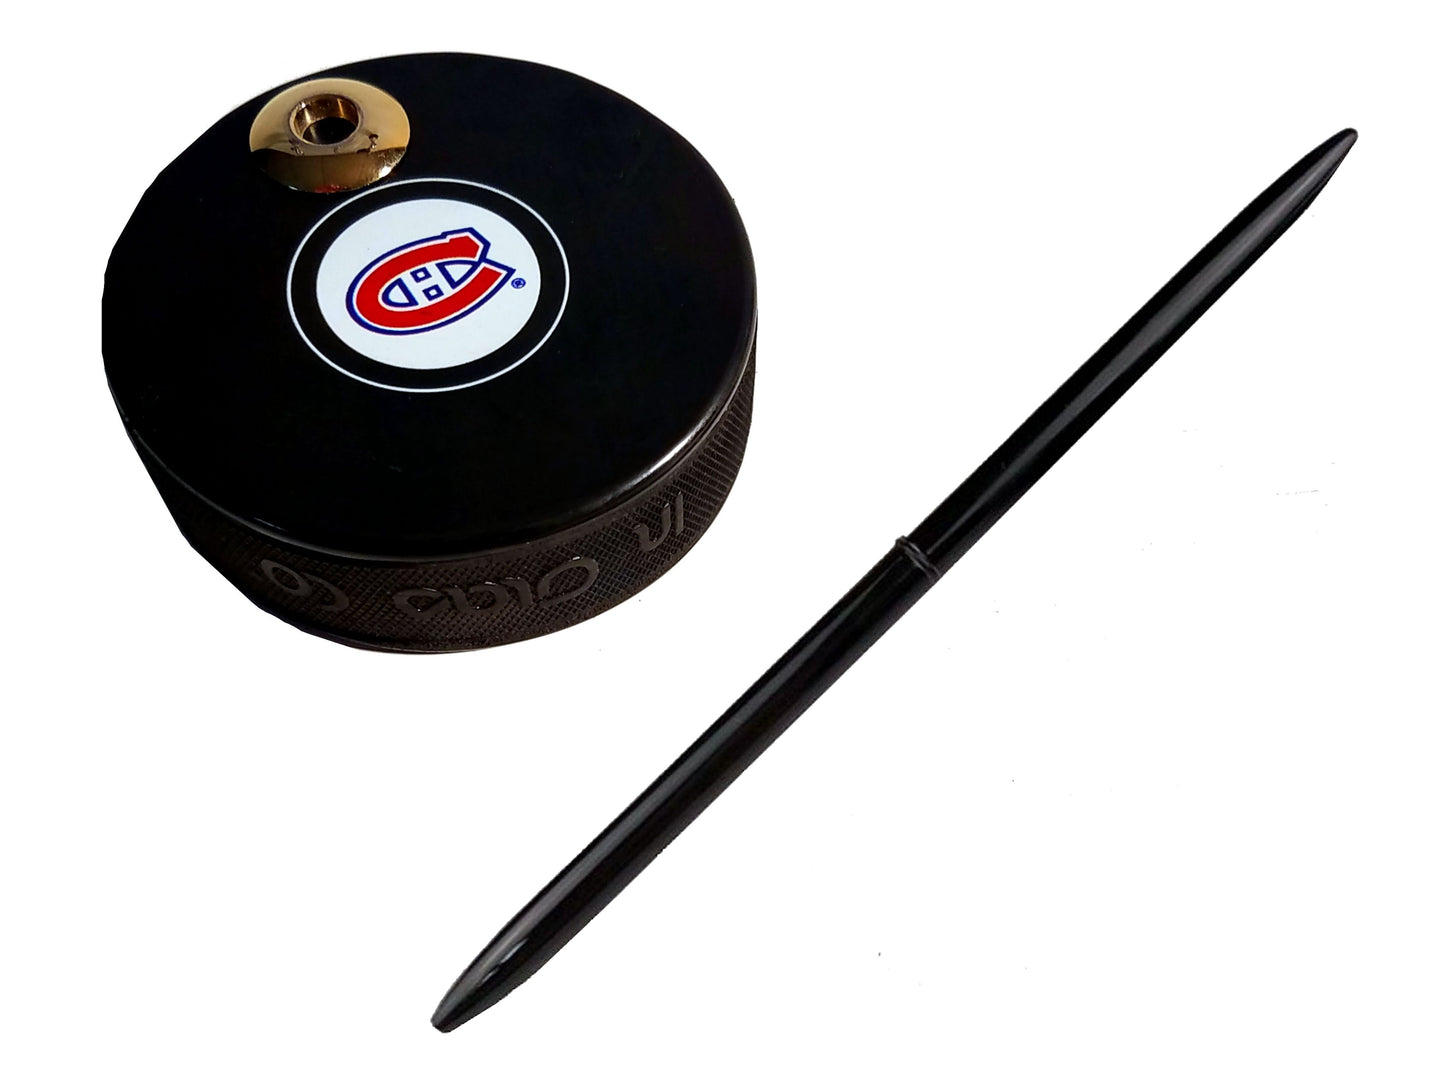 Montreal Canadiens Auto Series Artisan Hockey Puck Desk Pen Holder With Our #96 Sleek Pen